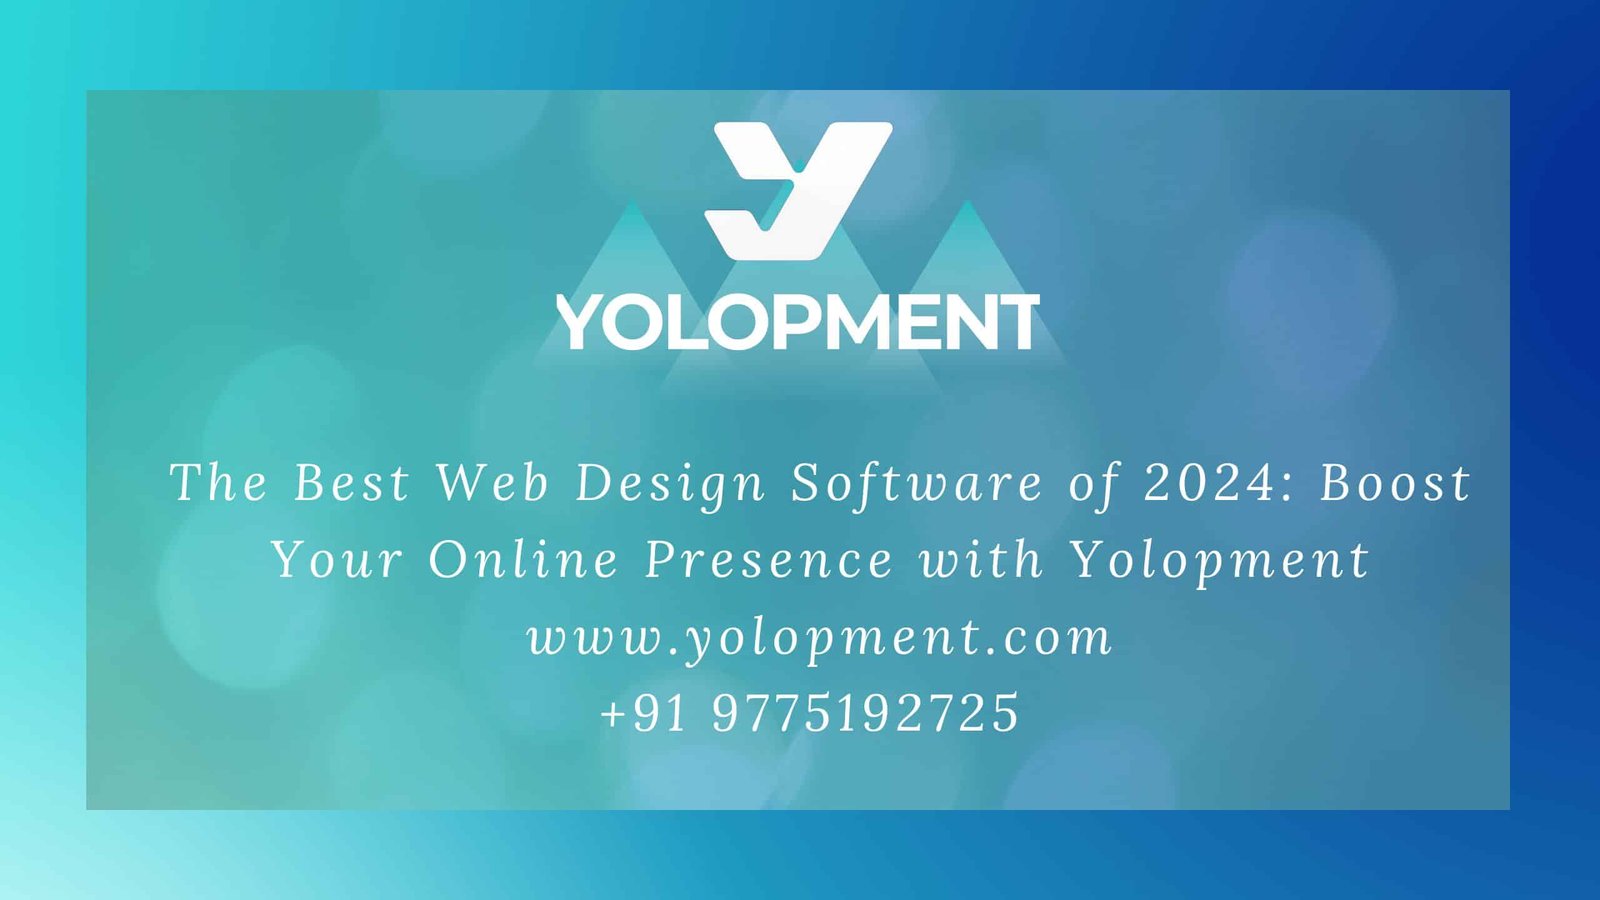 the Best Web Design Software of 2024: Boost Your Online Presence with Yolopment